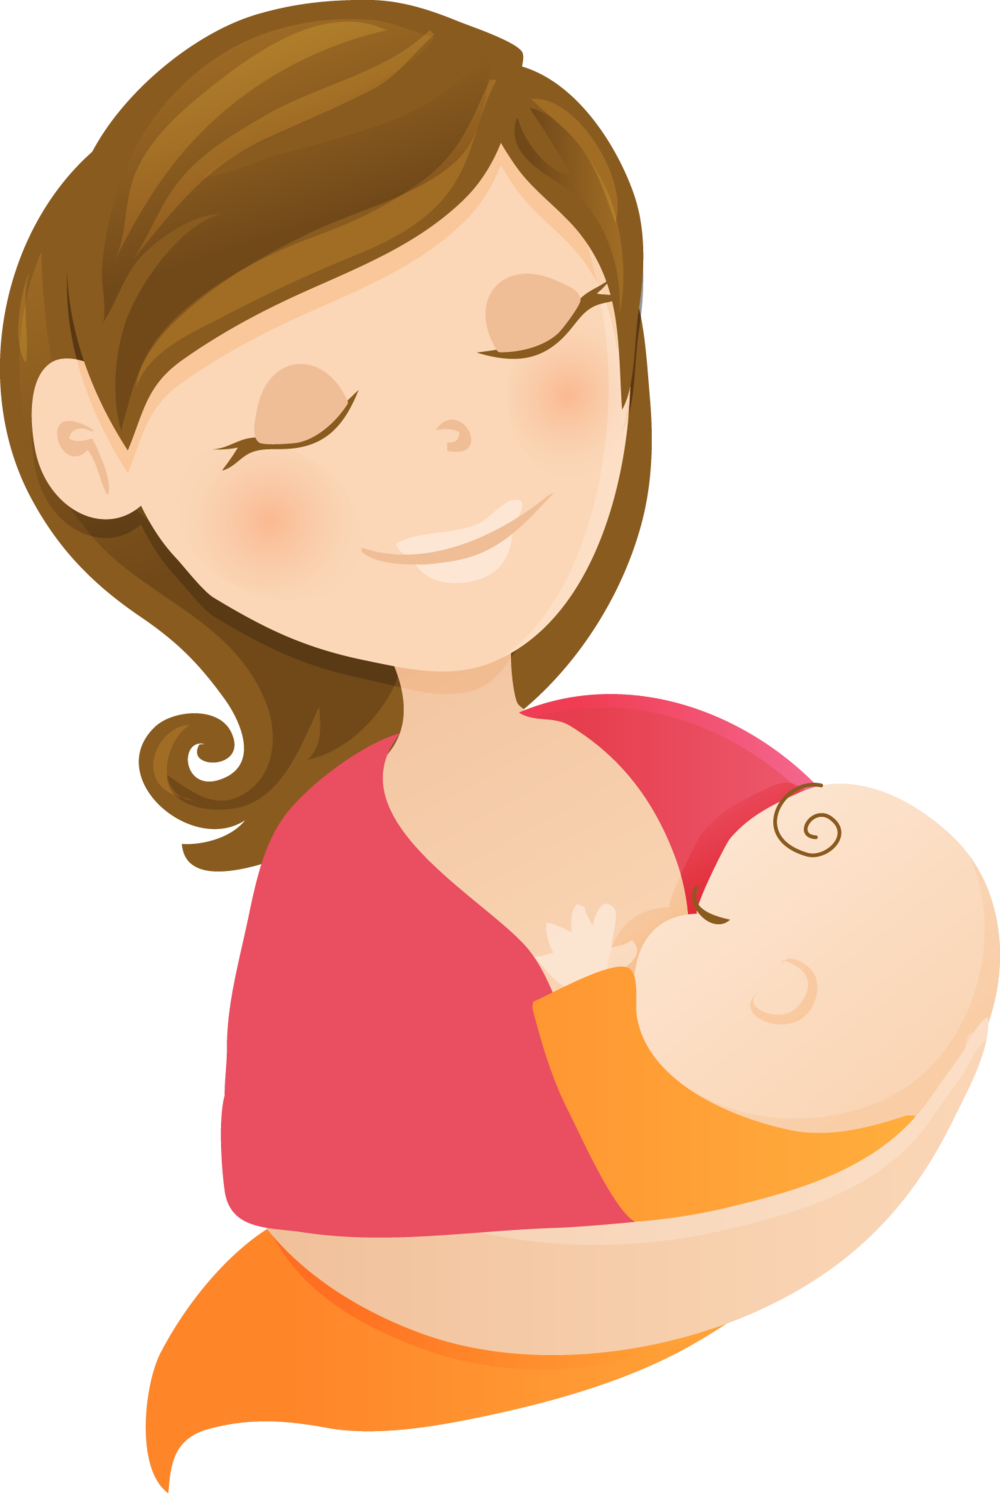 clipart of mother feeding baby - photo #33